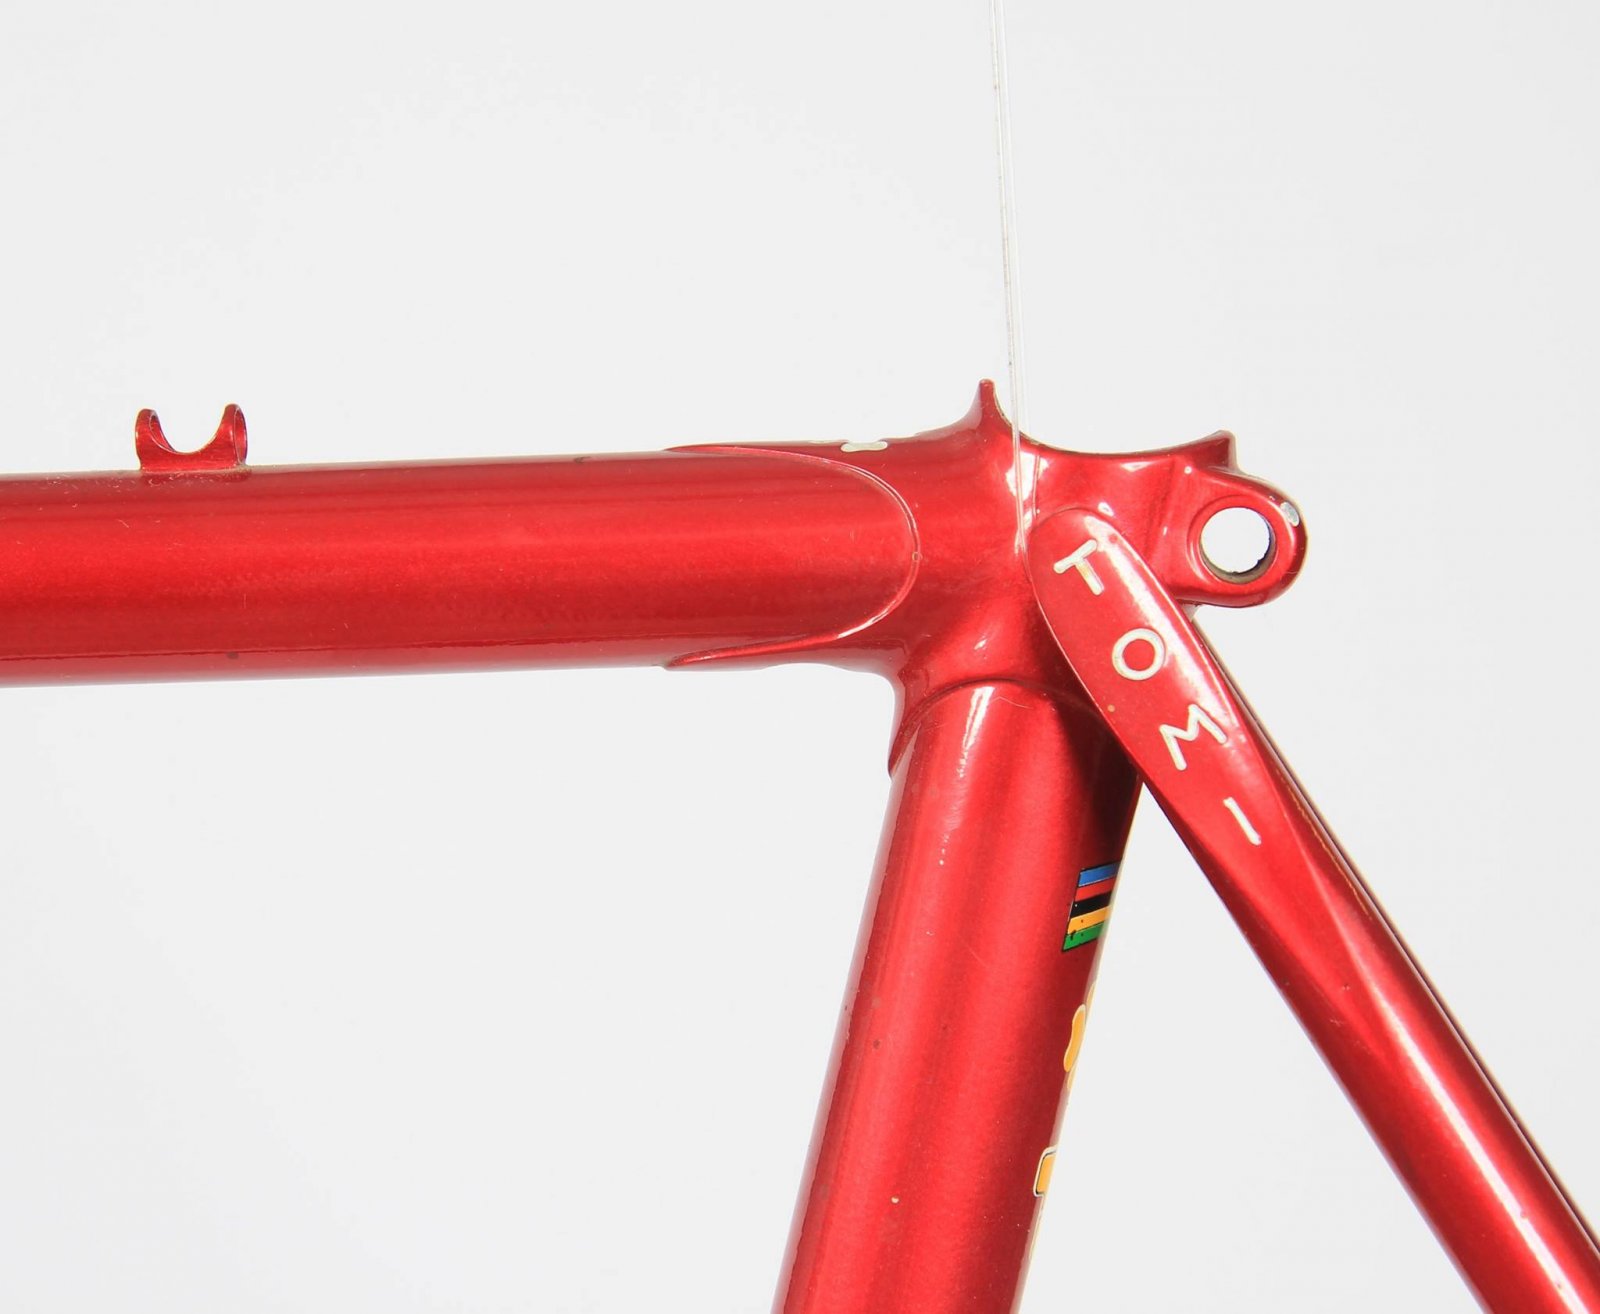 Tomi Competizione, Viterbo frame from late 70searly 80s repainted by Tomi in 90s himself (7).jpg